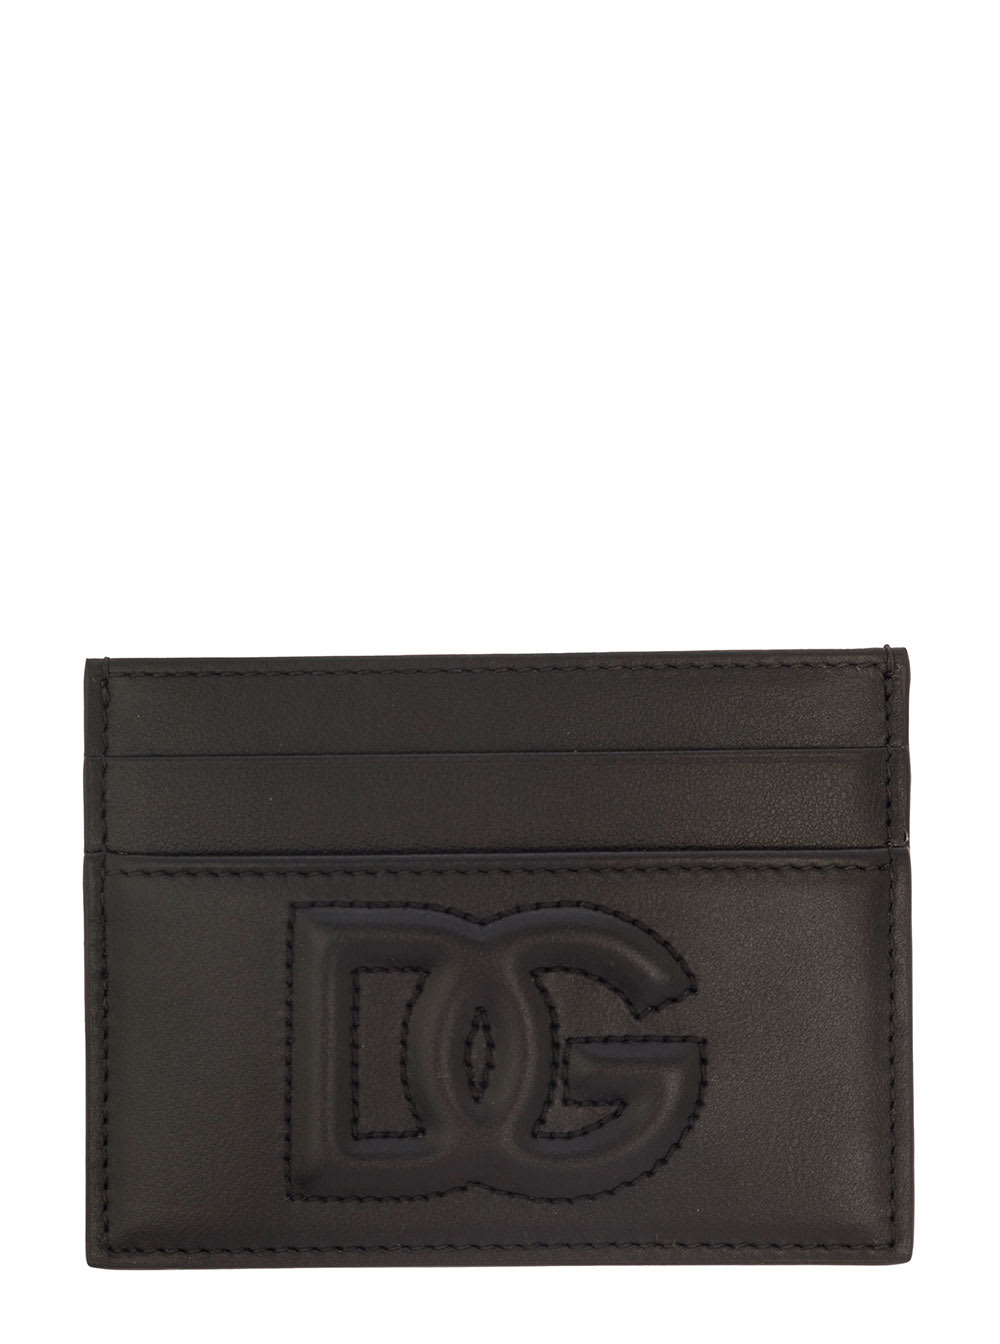 Dolce & Gabbana Black Card-holder With Dg Logo Detail In Smooth Leather Woman